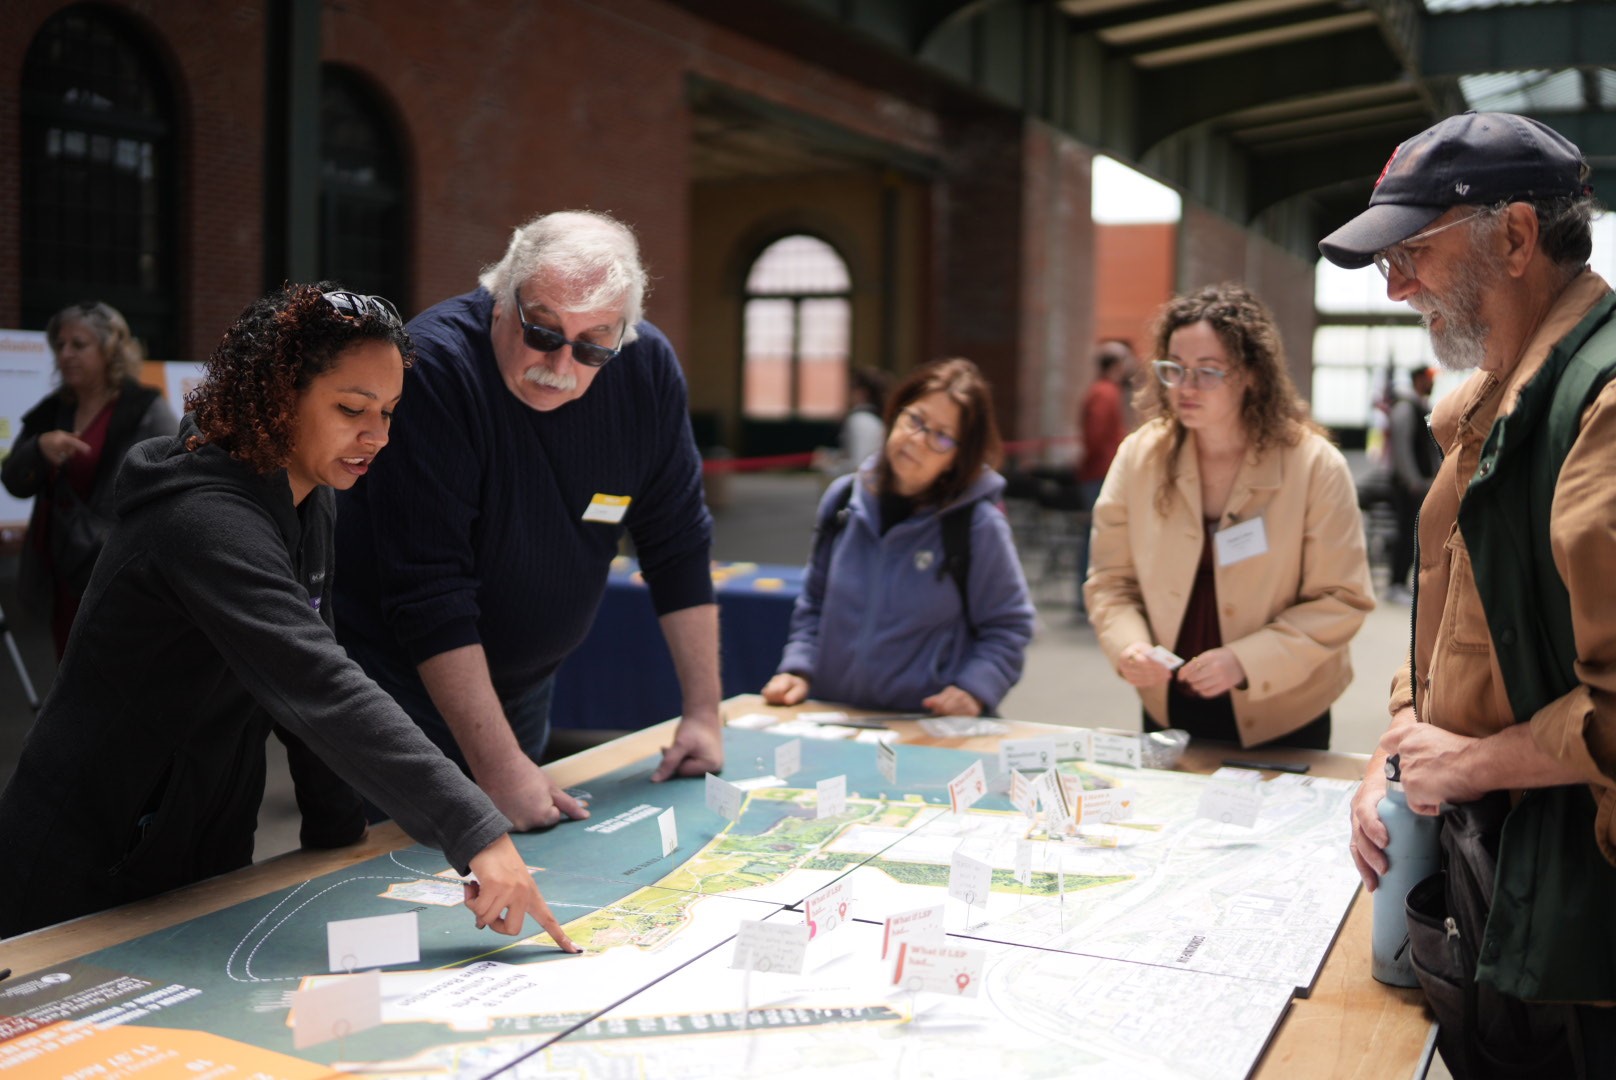 Liberty State Park South interactive tabletop